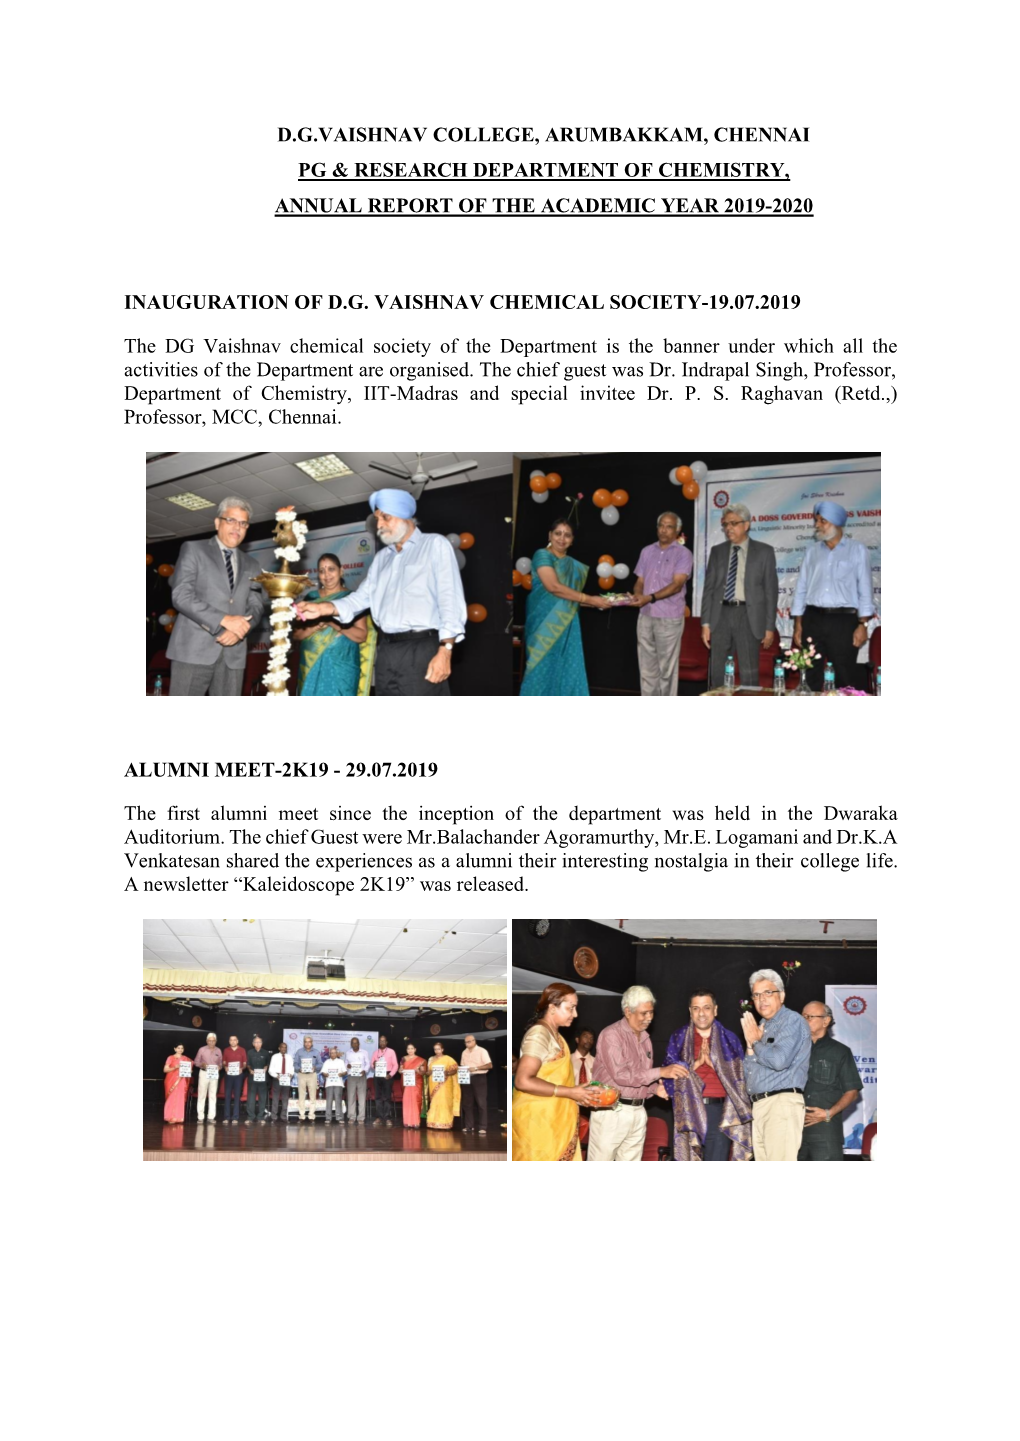 D.G.Vaishnav College, Arumbakkam, Chennai Pg & Research Department of Chemistry, Annual Report of the Academic Year 2019-202